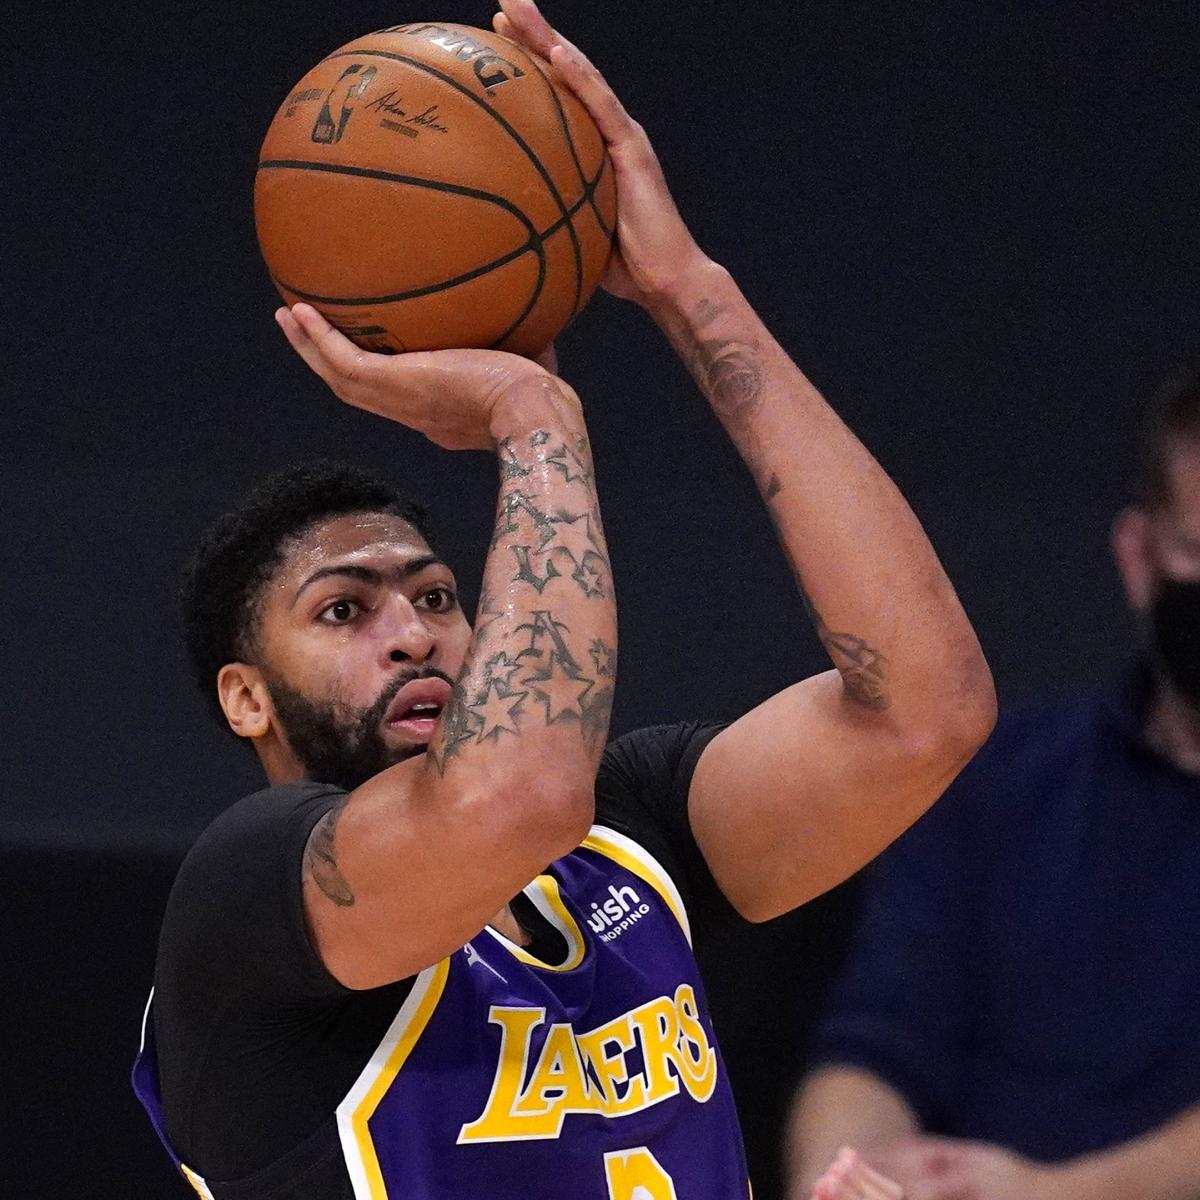 Lakers’ Anthony Davis to Be Re-Evaluated in 2 Weeks Amid Calf Injure Rehab